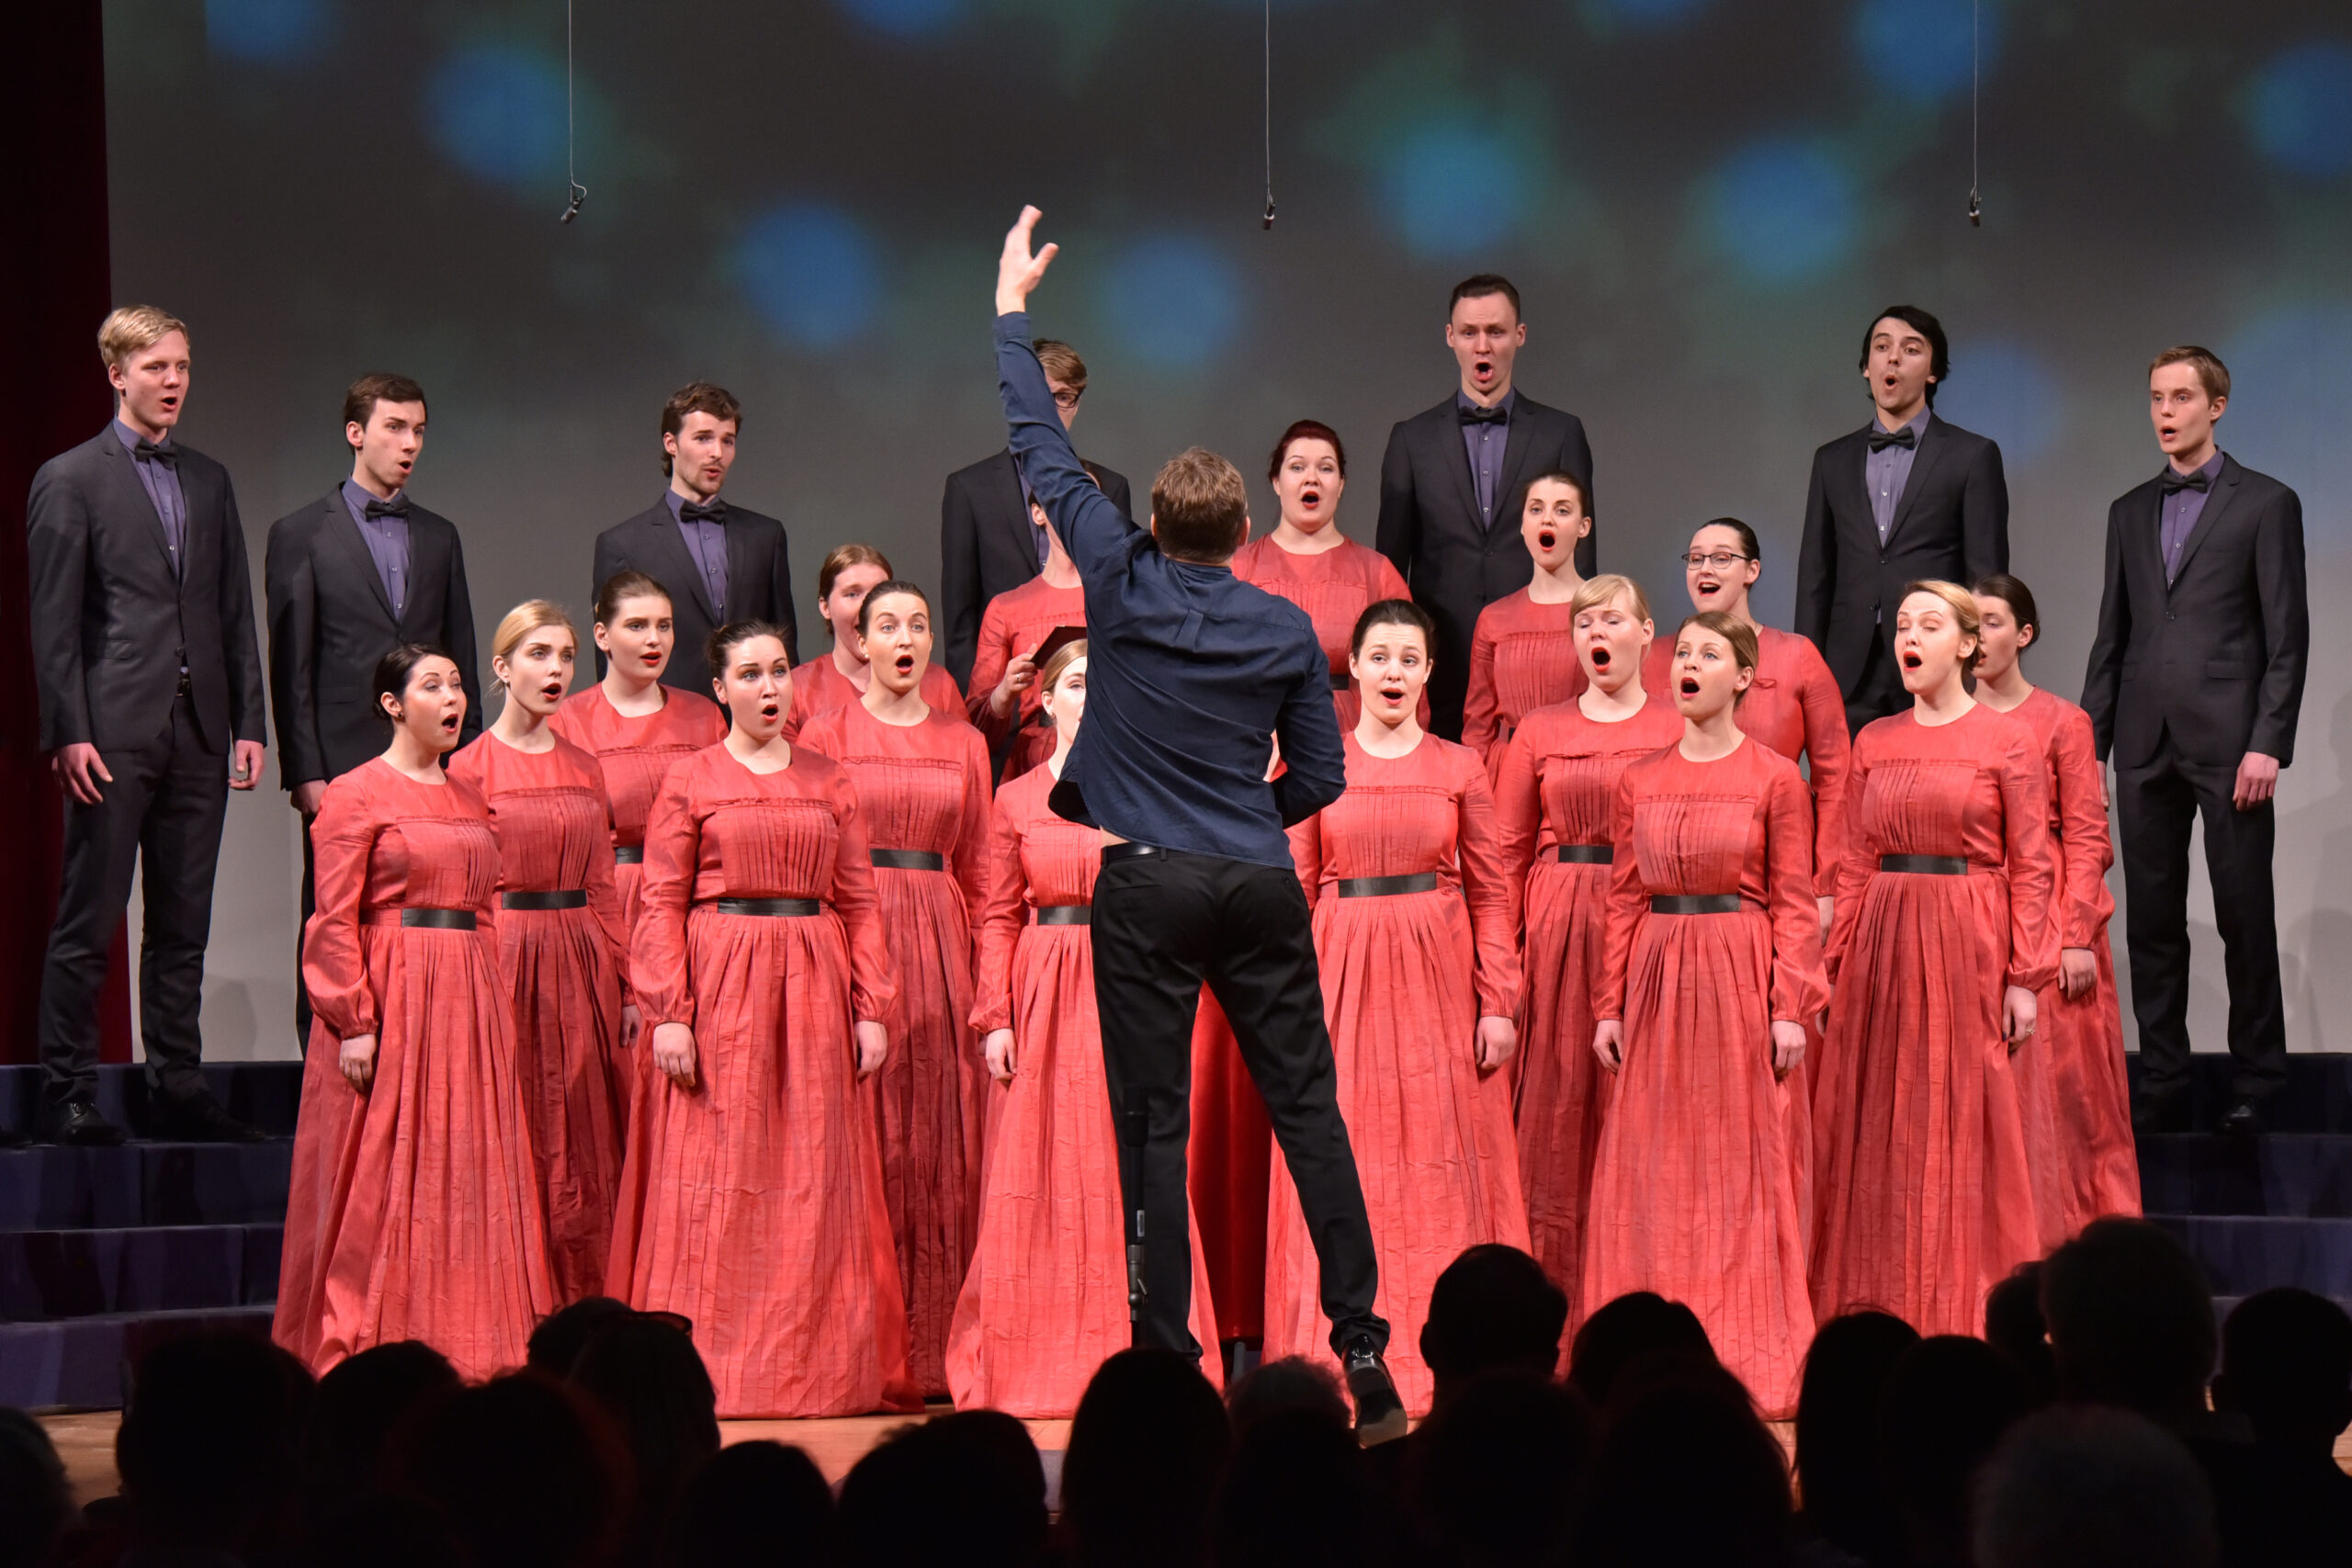 Janez Eržen, Slovenia: A Little Higher, Please, 2017, Youth Choir Balsis, Latvia - 14th International Choral Competition Gallus, Maribor, 2017. The competition has been a member of the European Grand Prix for Choral Singing Association since 2008.